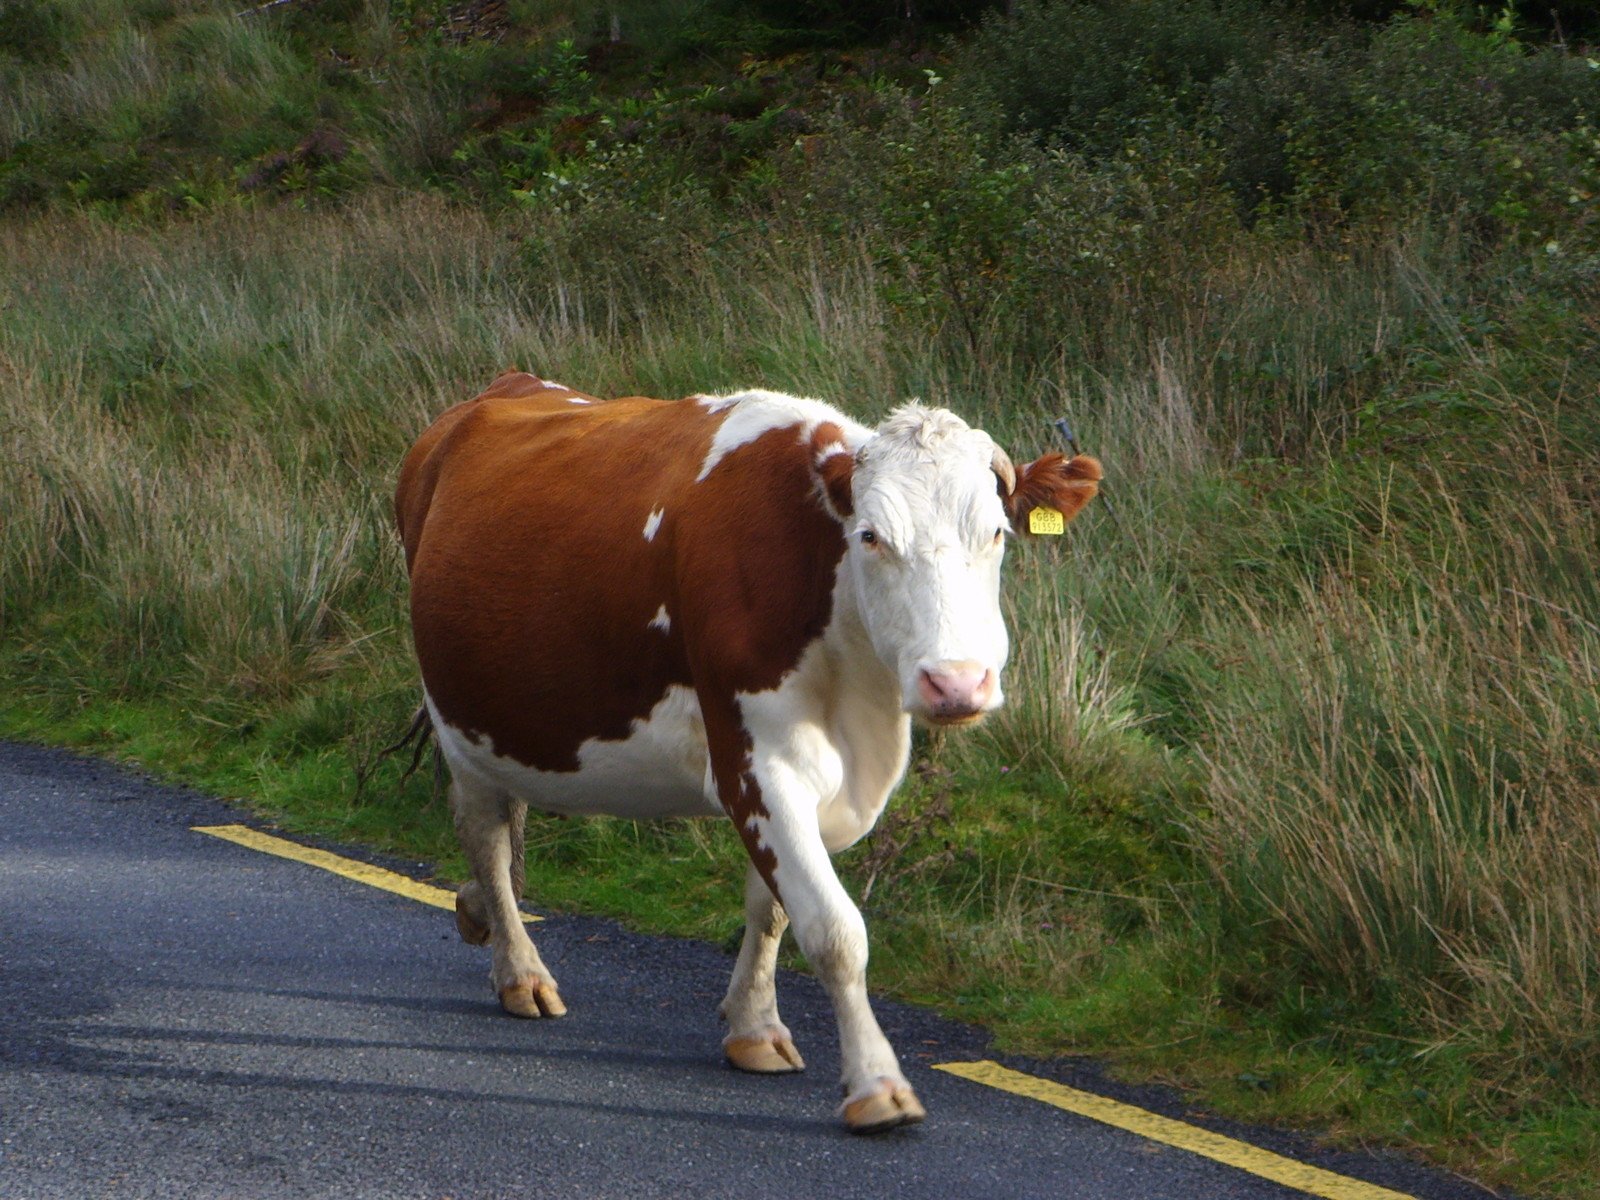 a brown and white cow is walking on a country road